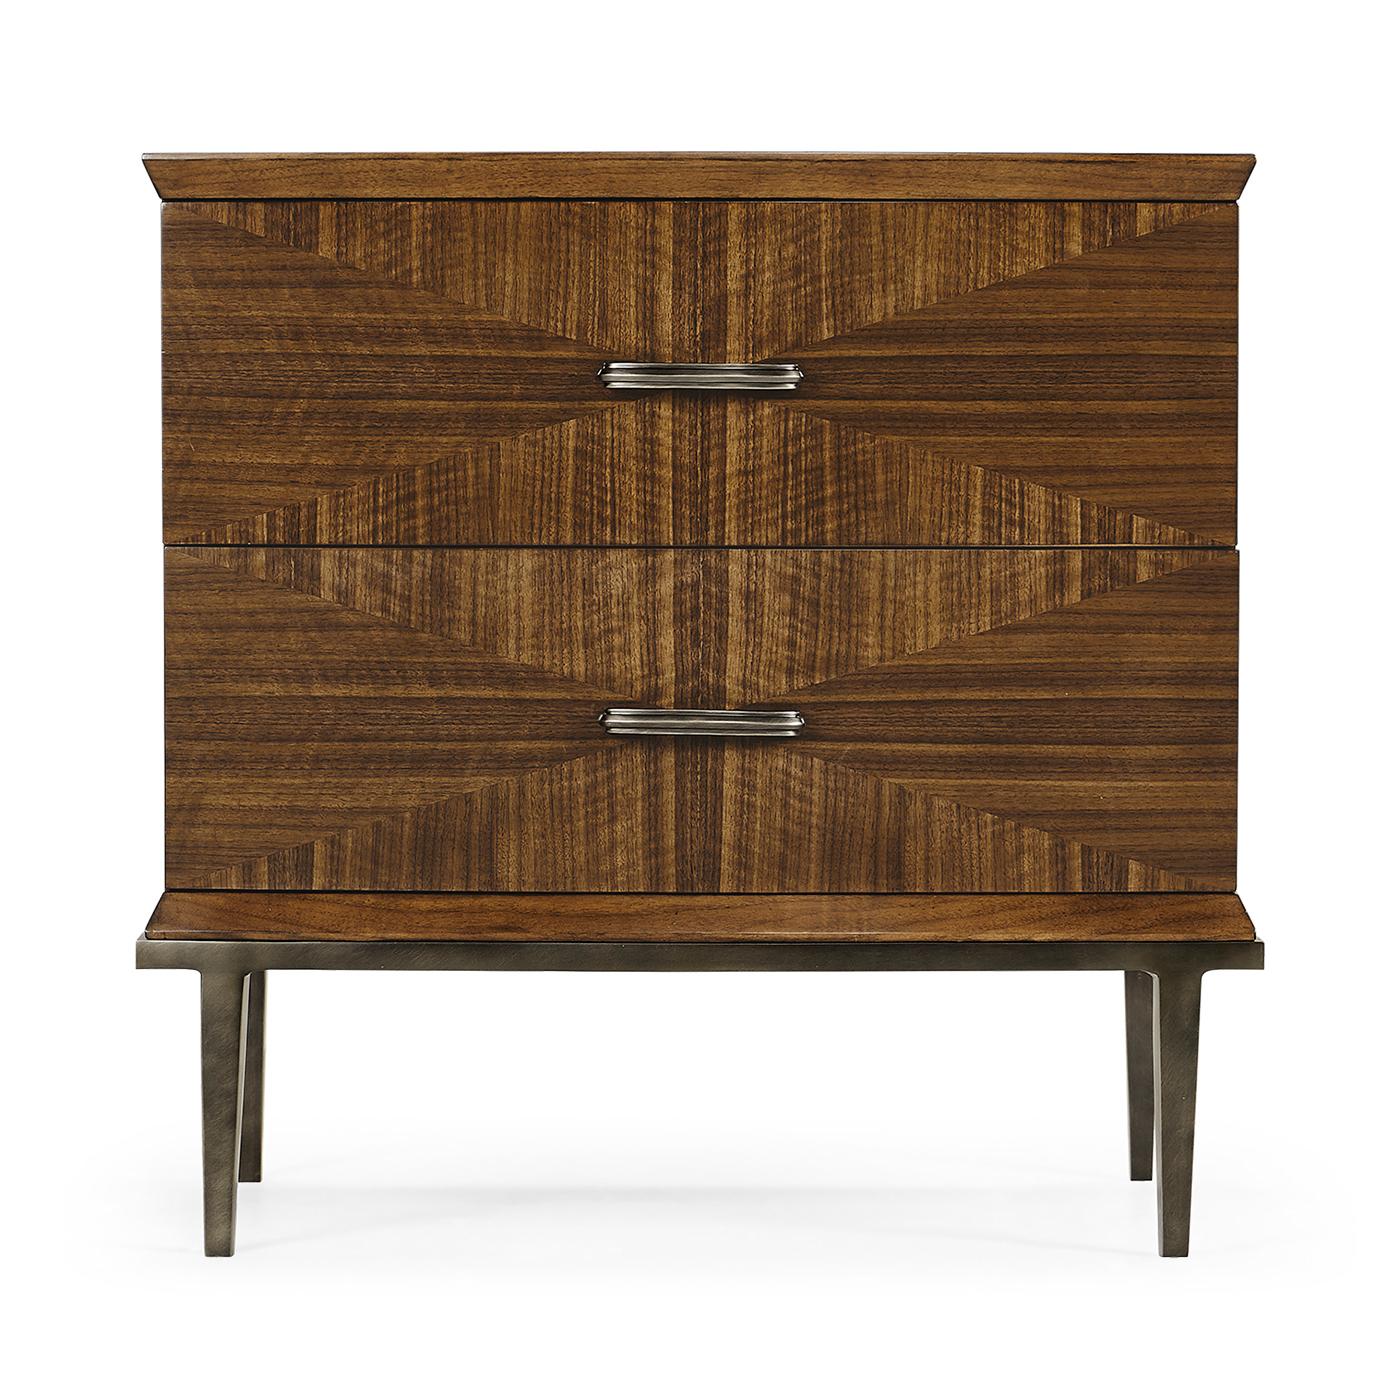 Mid century style nightstands, constructed of American walnut with a transparent, hand-rubbed finish. The drawer fronts feature walnut veneers in a box match veneer. The hardware is cast brass, acid dipped and hand-rubbed to achieve a deep, natural